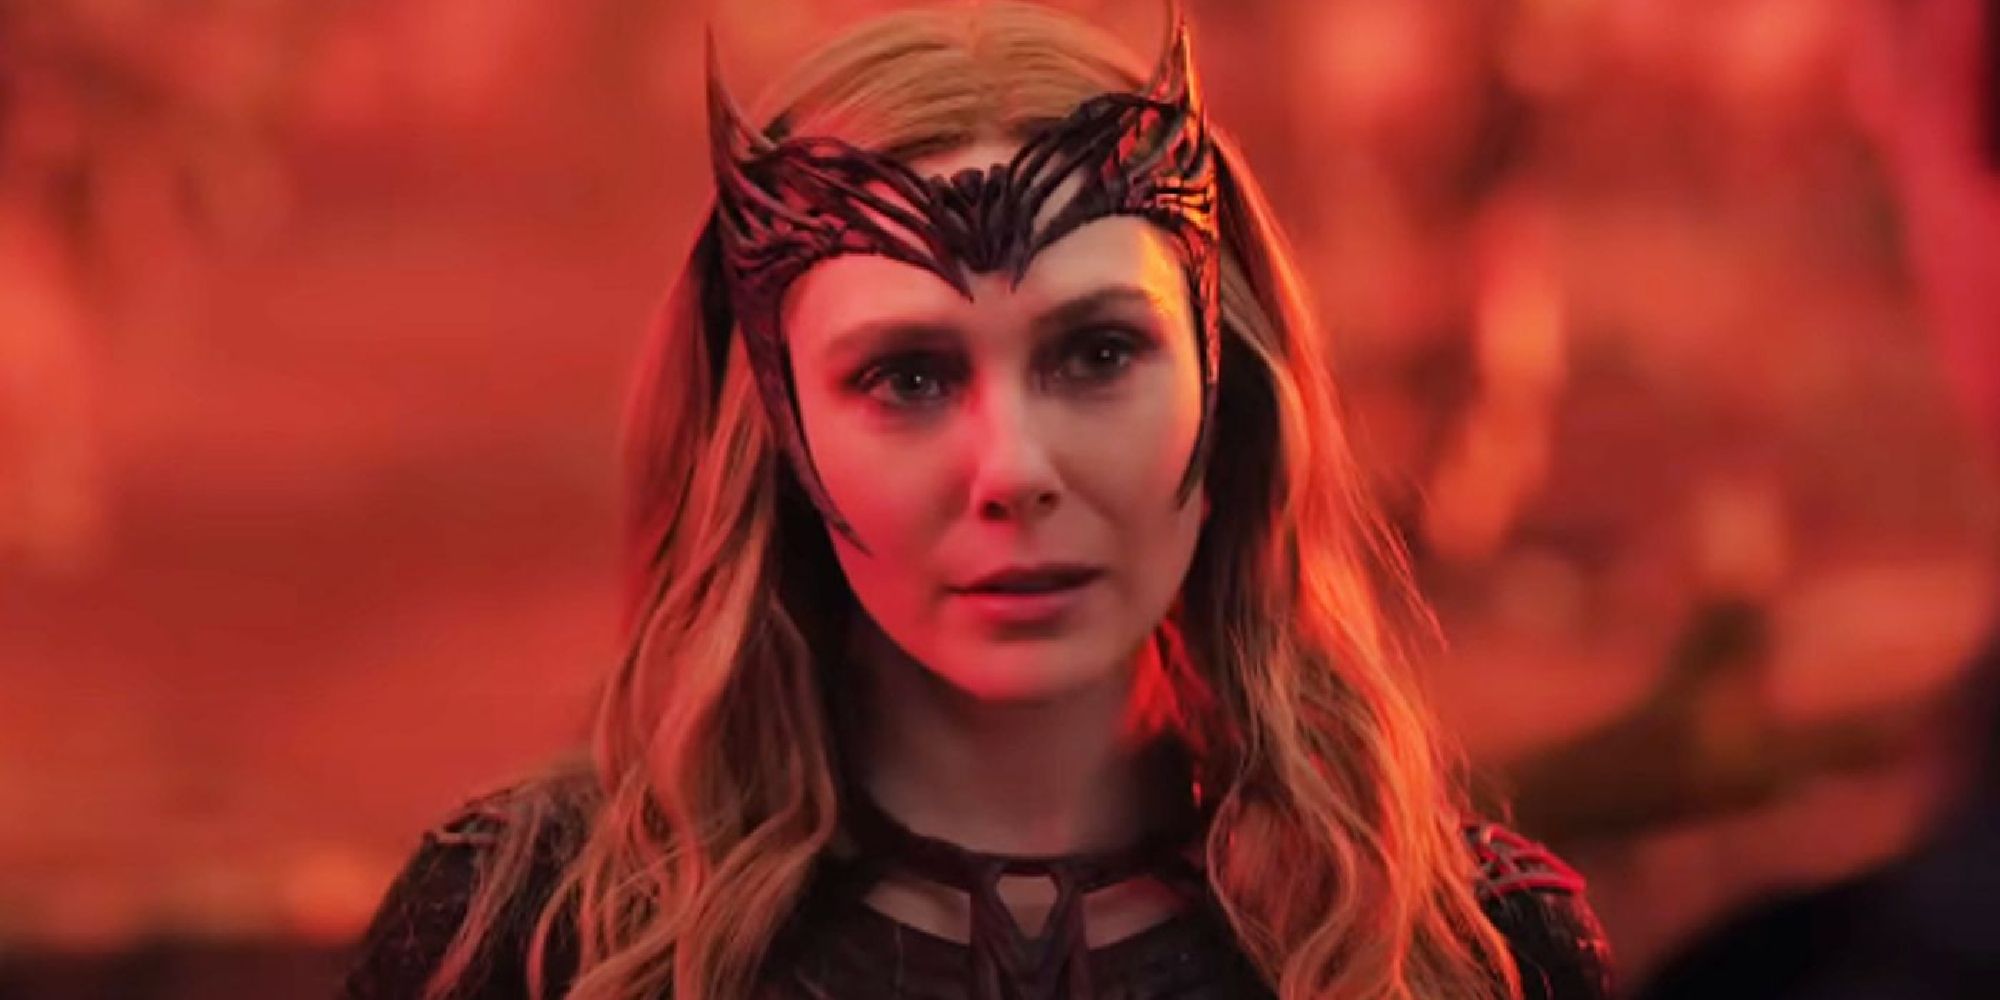 Wanda appearing as the Scarlet Witch in Multiverse of Madness